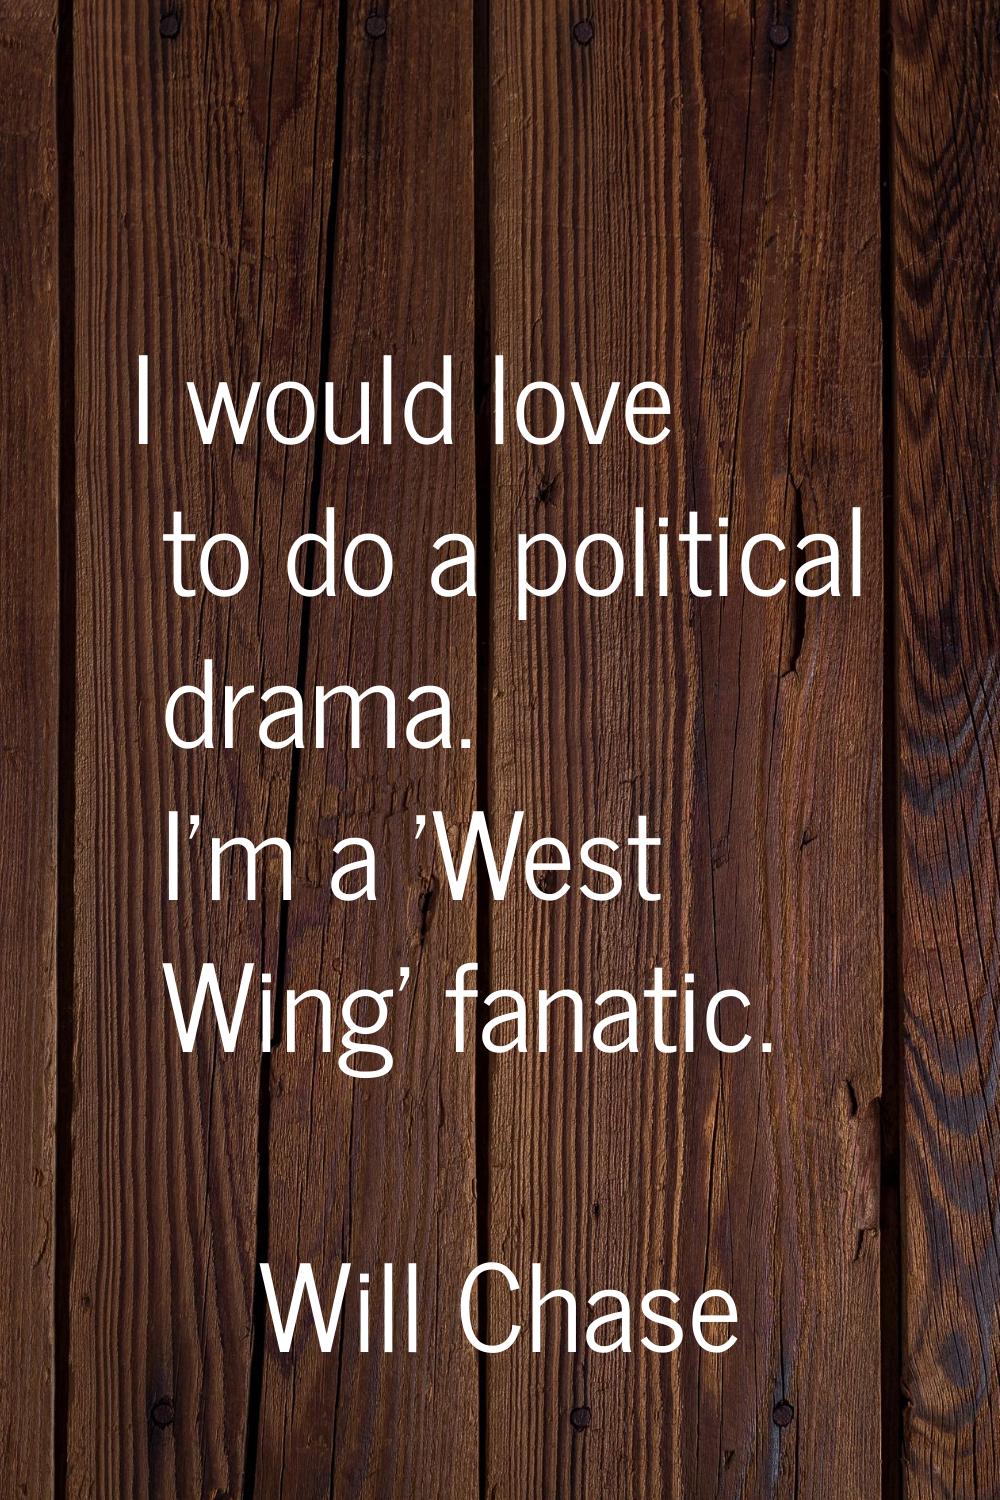 I would love to do a political drama. I'm a 'West Wing' fanatic.